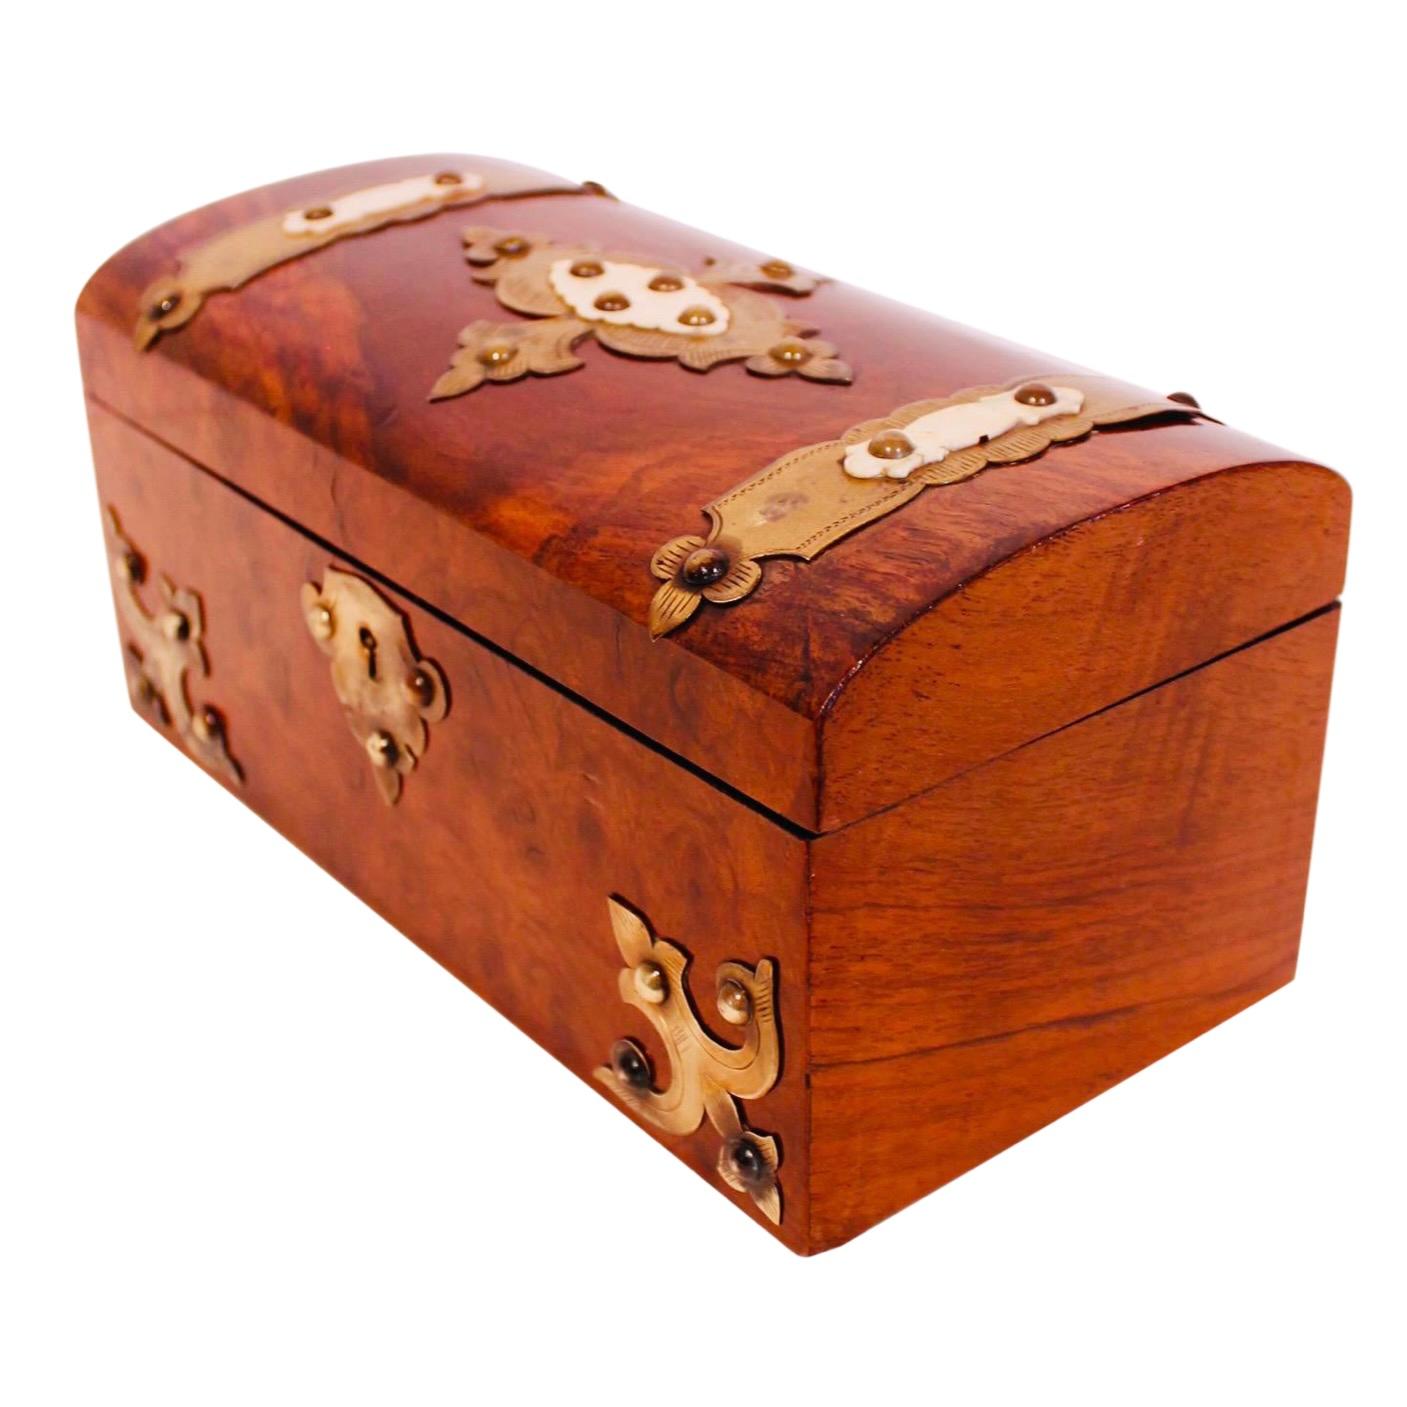 A handsome Victorian era burl wood tea caddy retaining much of its interior silvering. The exterior is adorned with ornamental brass strapwork elements, studs and an escutcheon, the lid is further embellished with carved bone elements layered on top